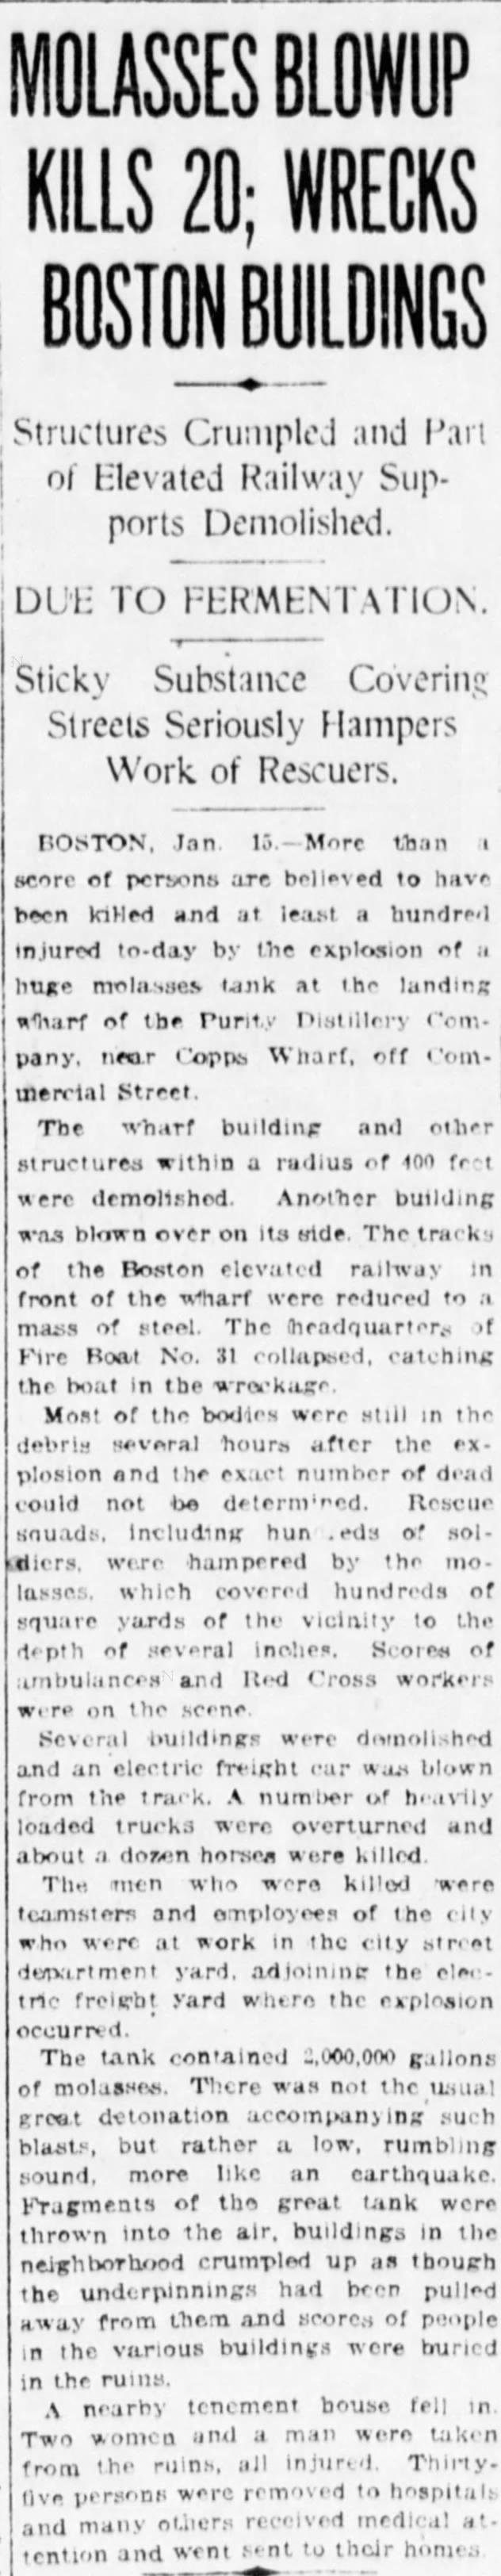 The Great Molasses Flood of 1919.